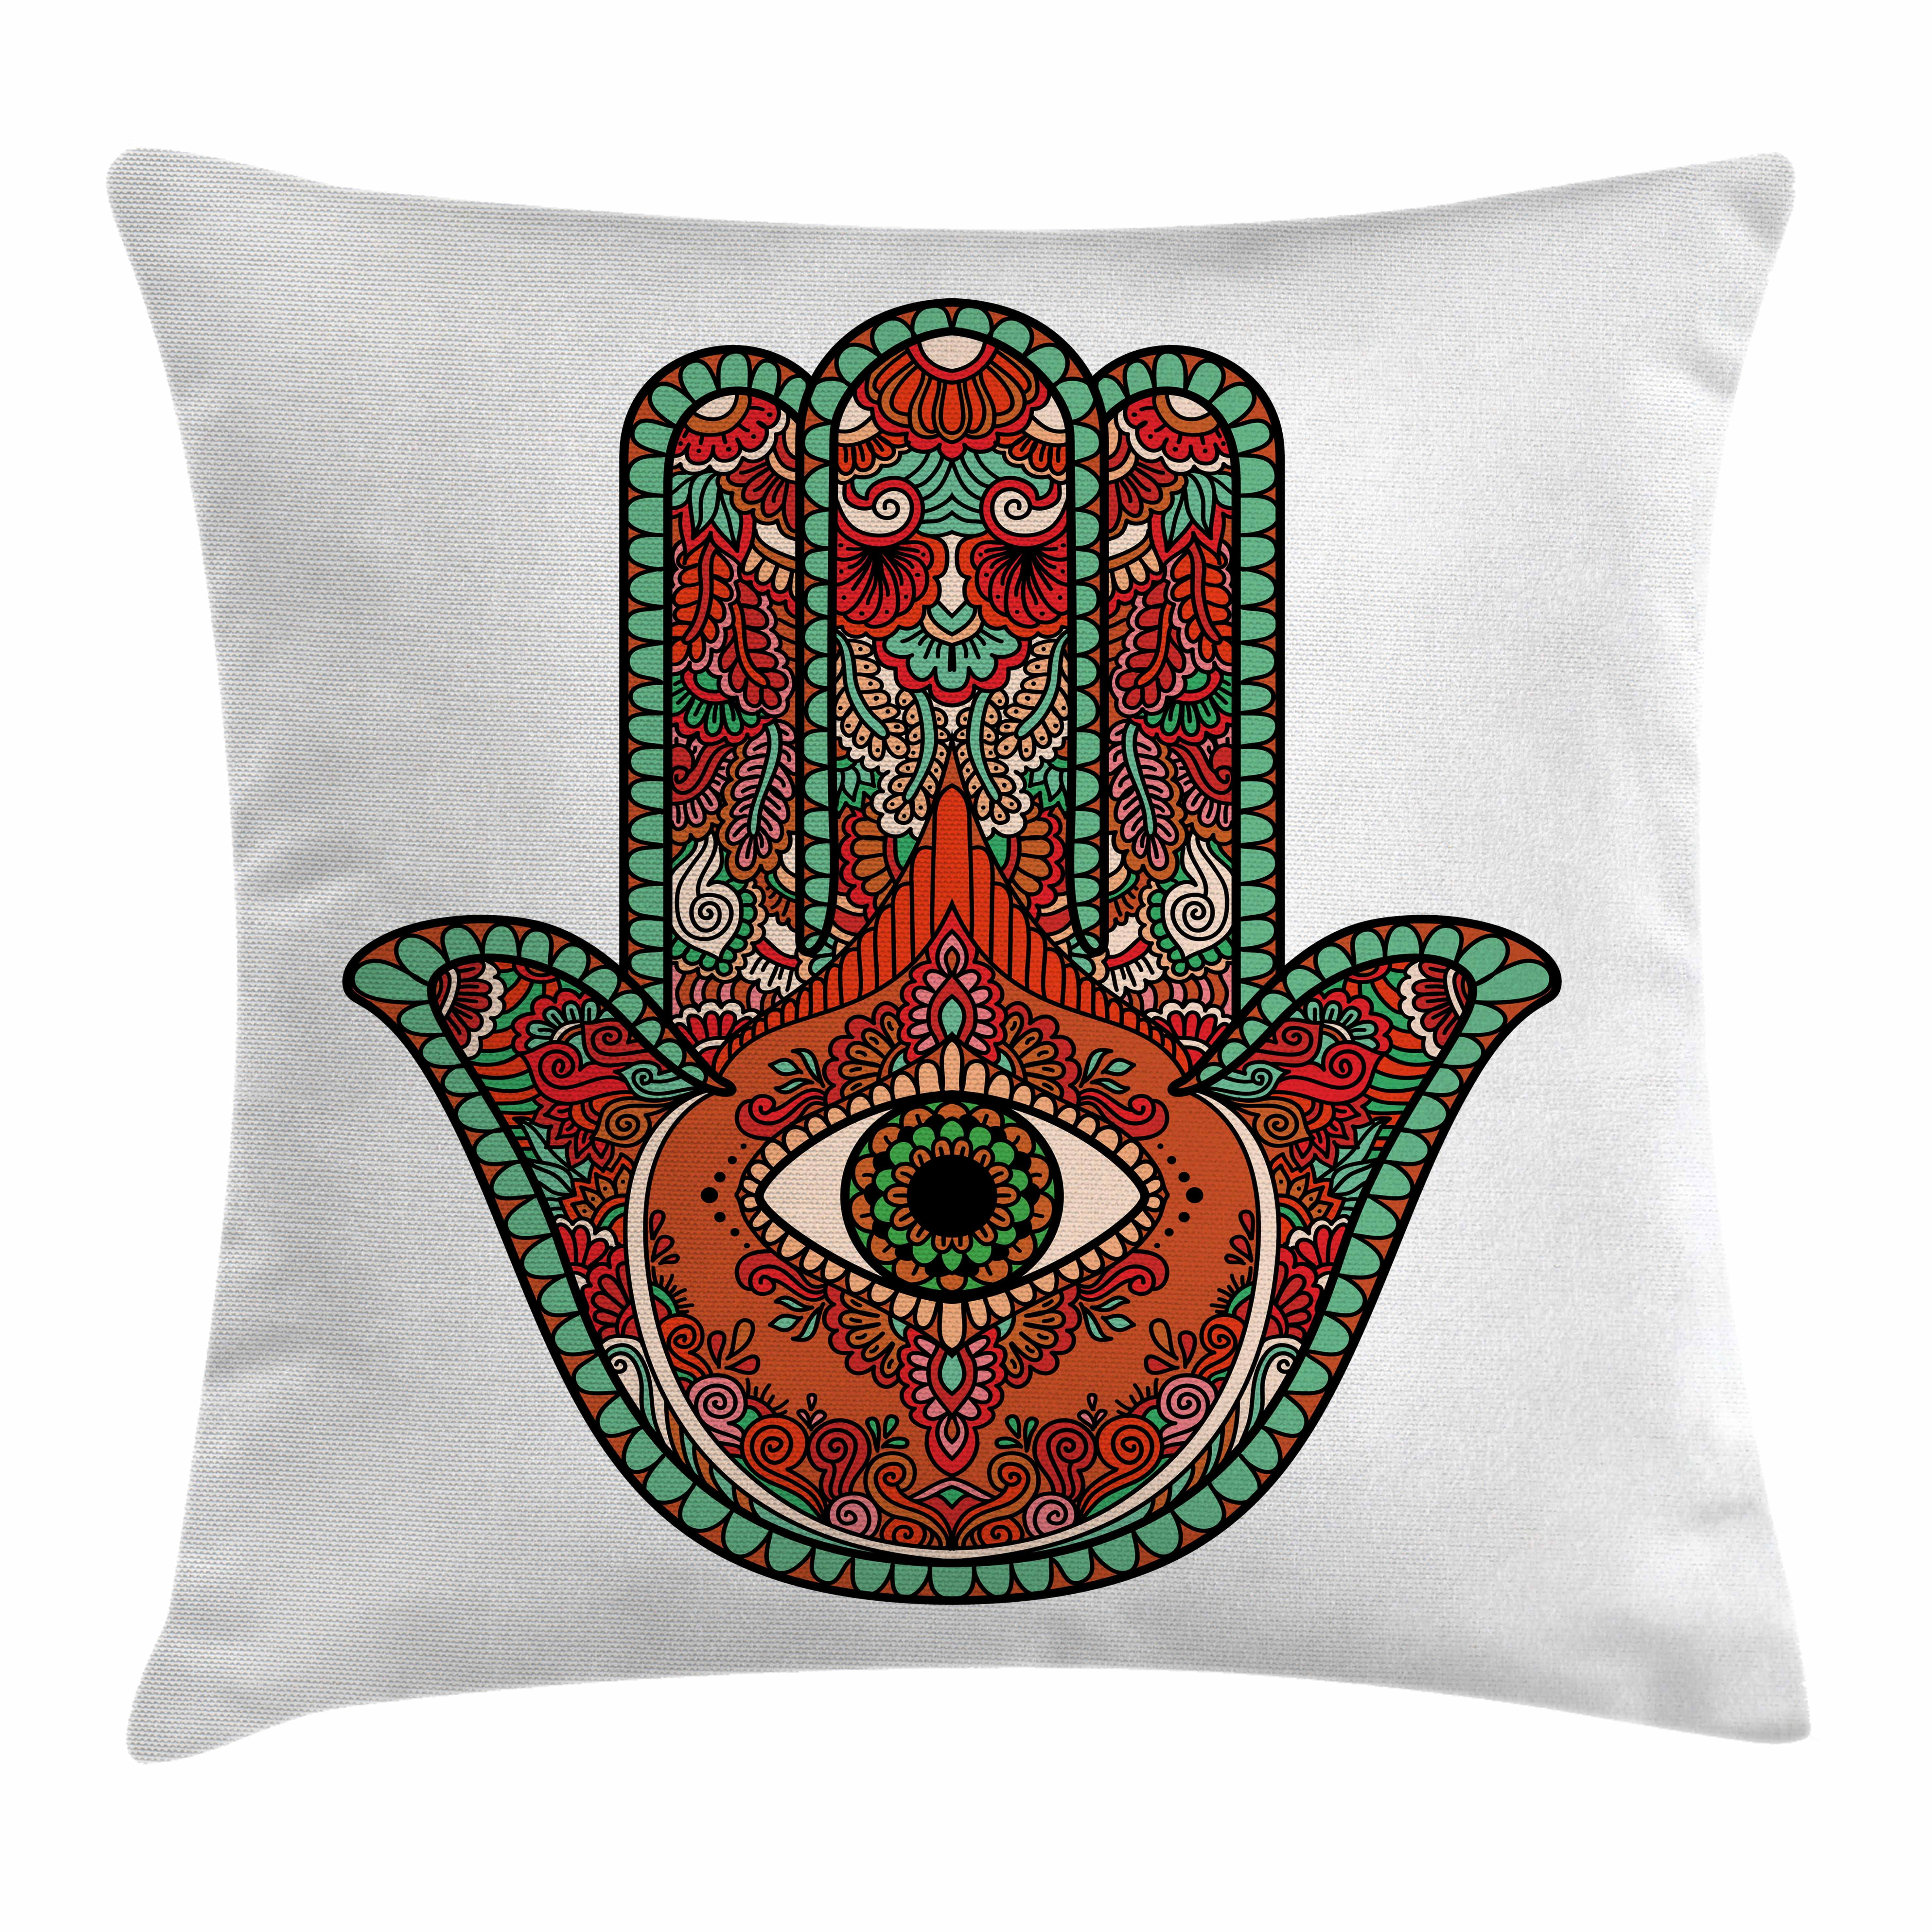 Evil Eye Throw Pillow Cushion Cover, Vintage Bohemian Style Colorful ...